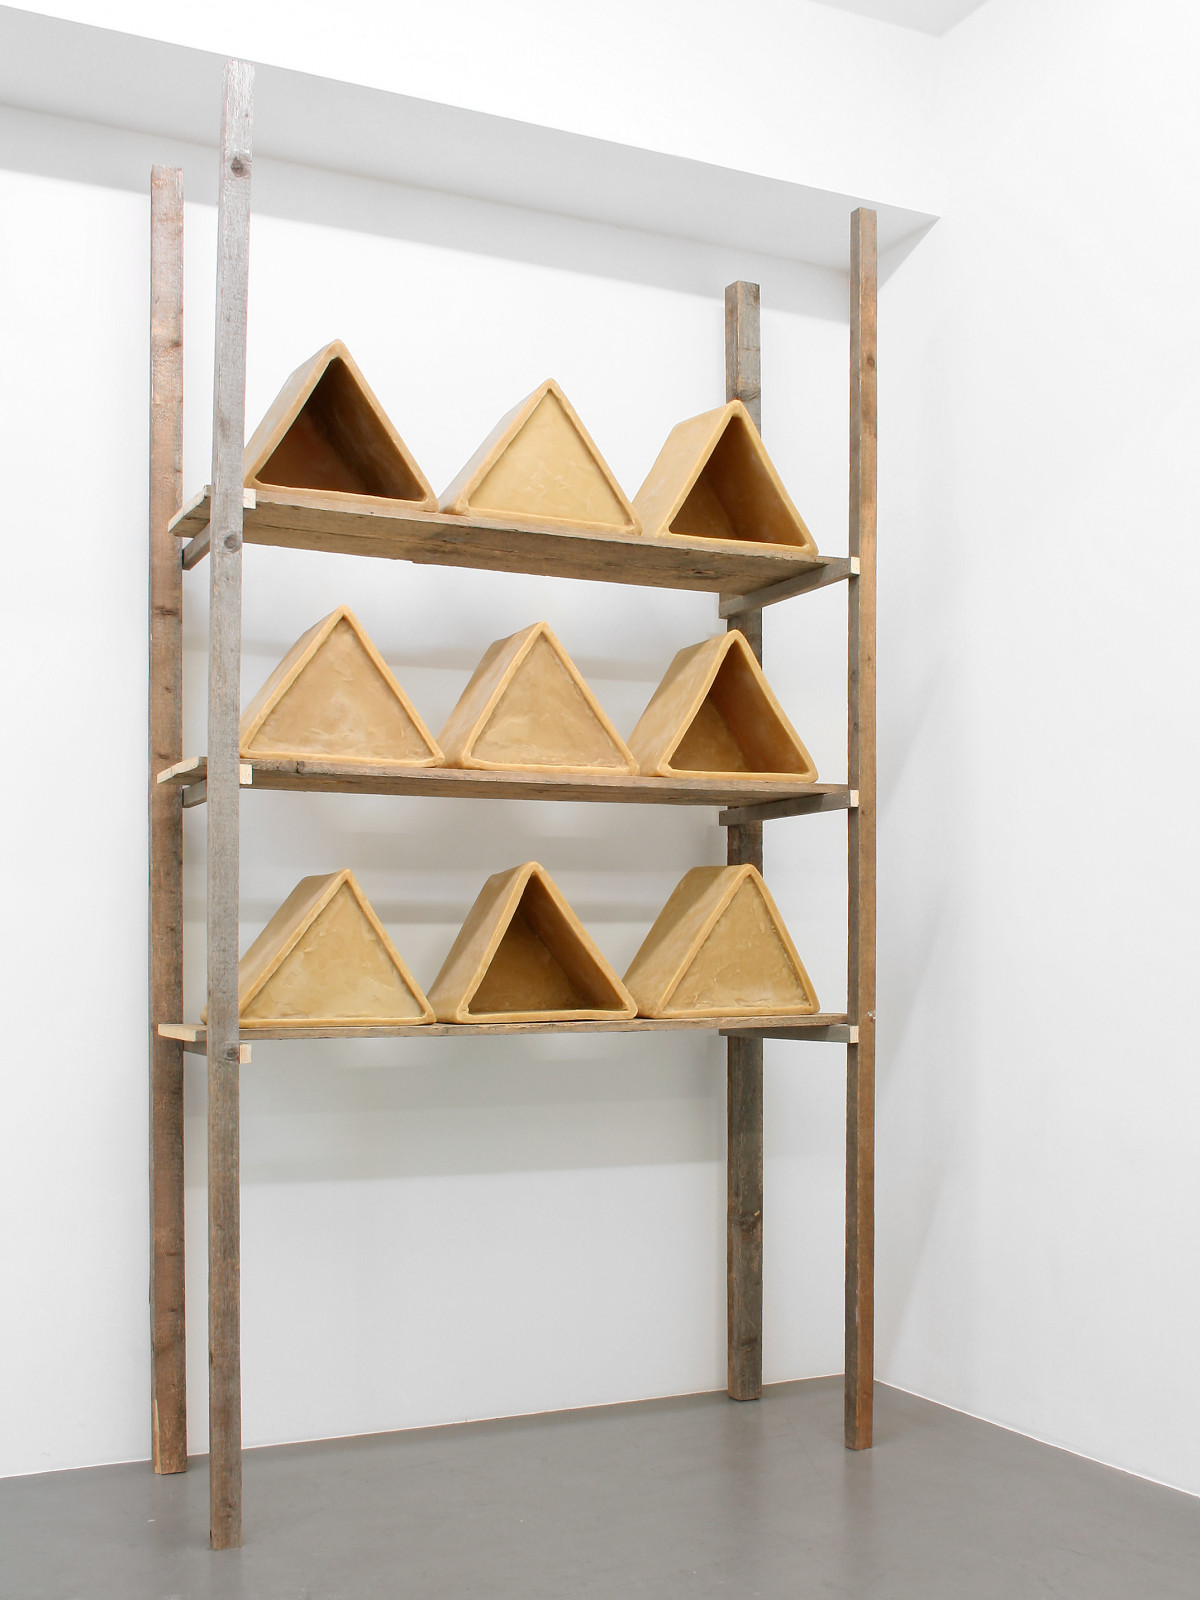 Wolfgang Laib, ‘Untitled’, 2006-2007, Beeswax, wood 